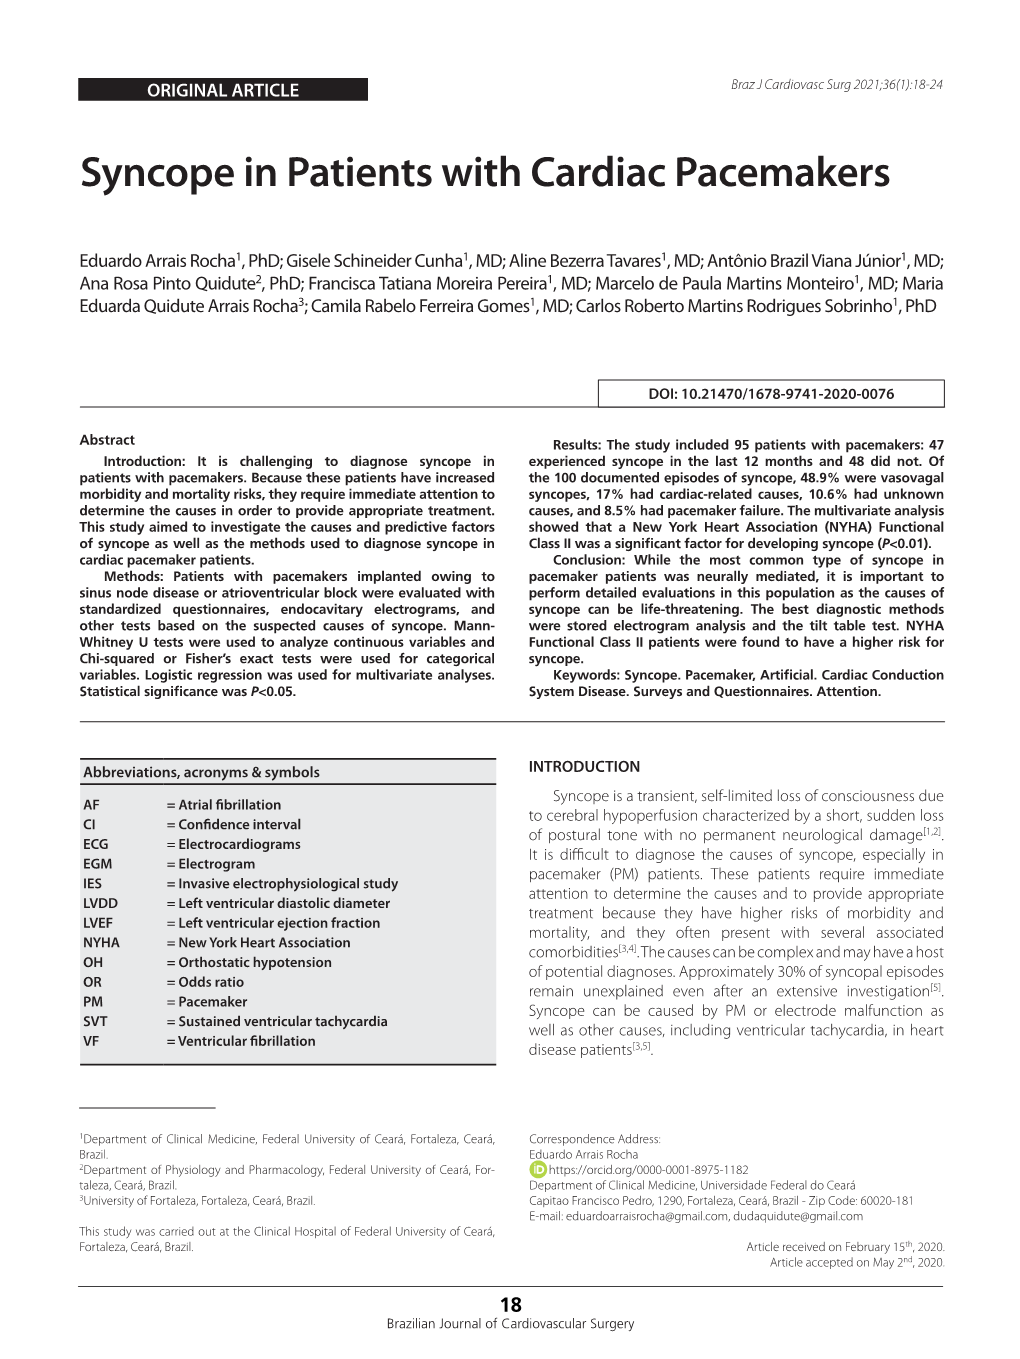 Syncope in Patients with Cardiac Pacemakers